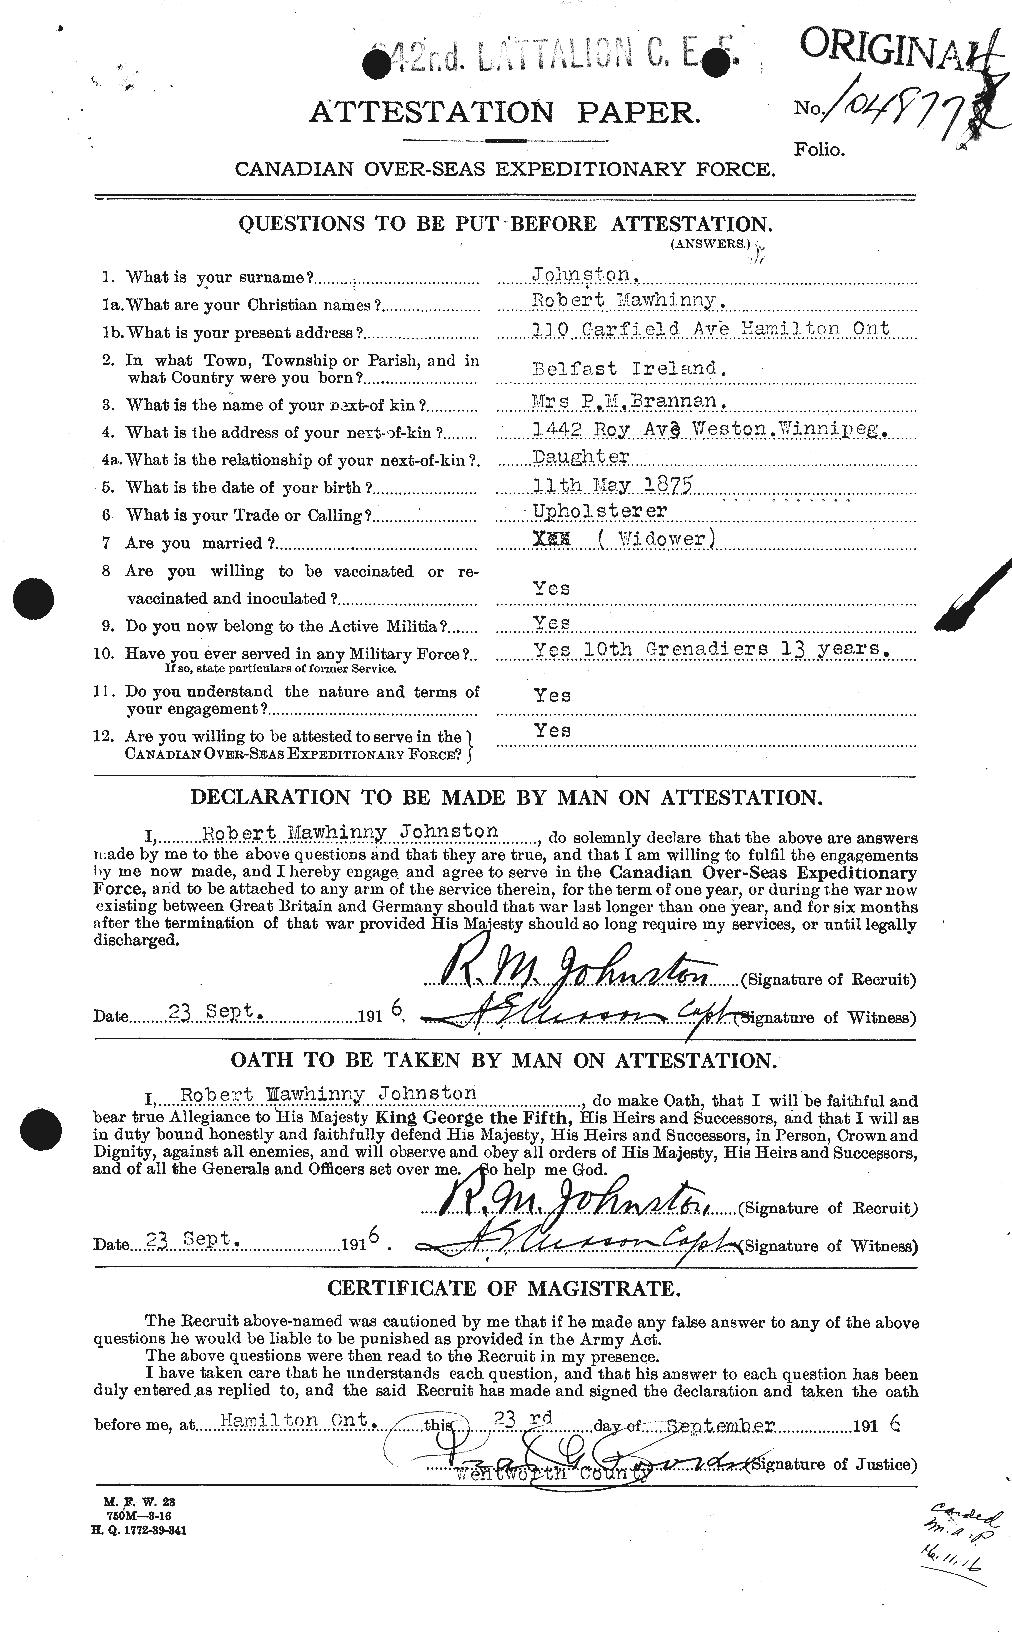 Personnel Records of the First World War - CEF 427032a